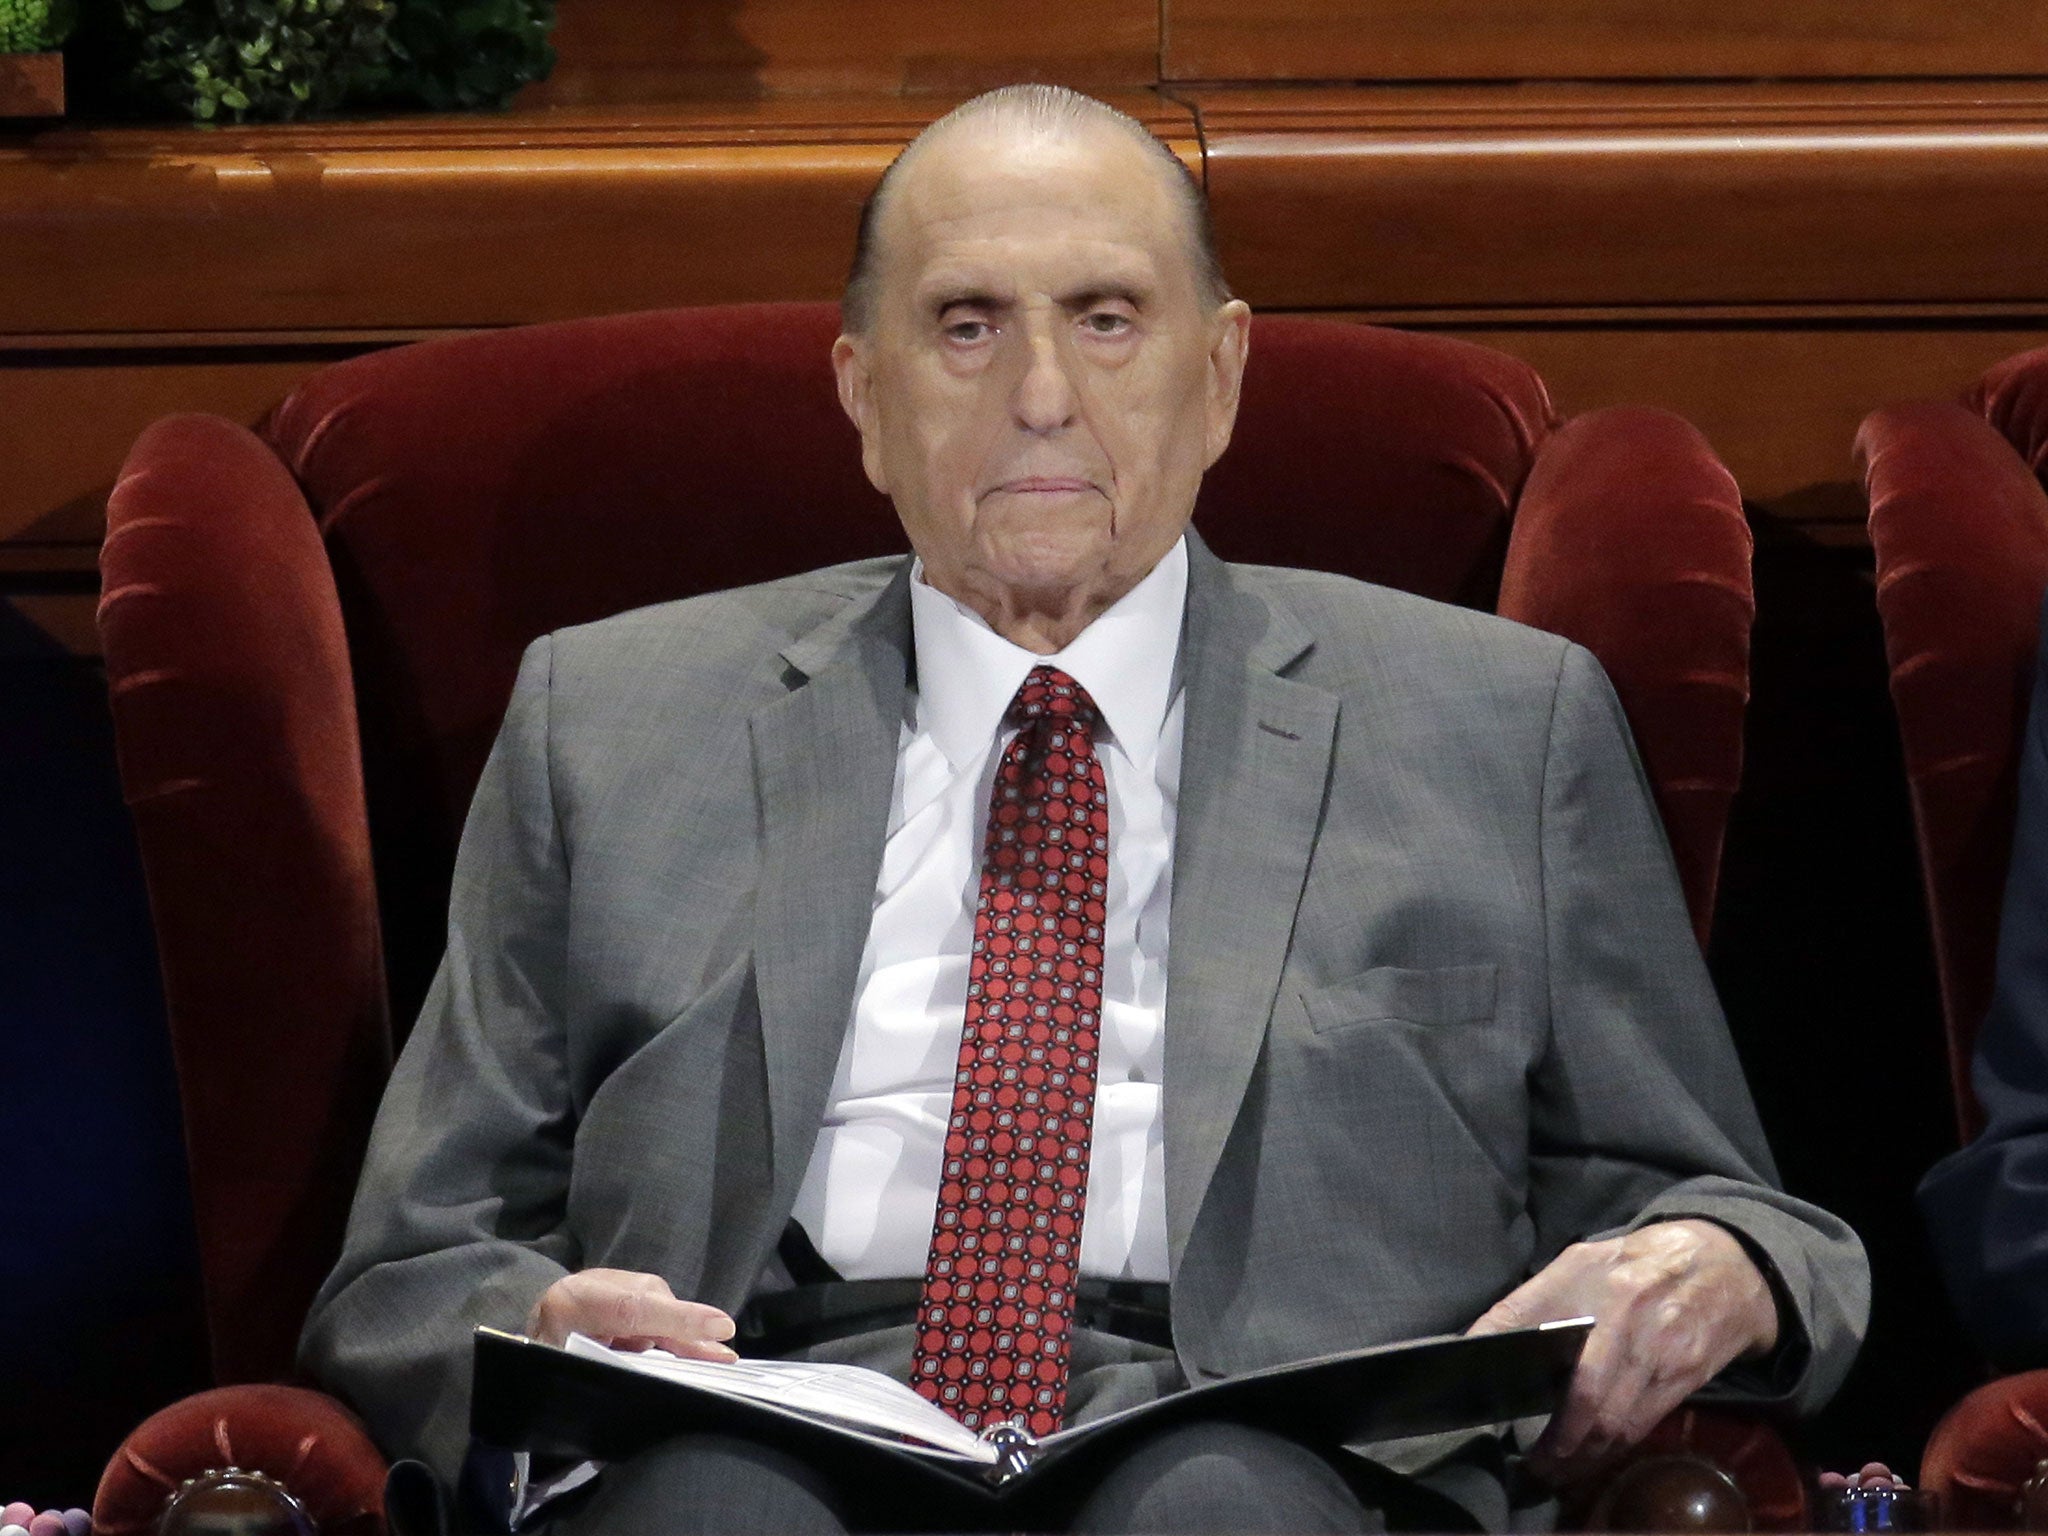 Thomas Monson, president of the Church of Jesus Christ of Latter-day Saints, is pictured at the two-day Mormon church conference in Salt Lake City